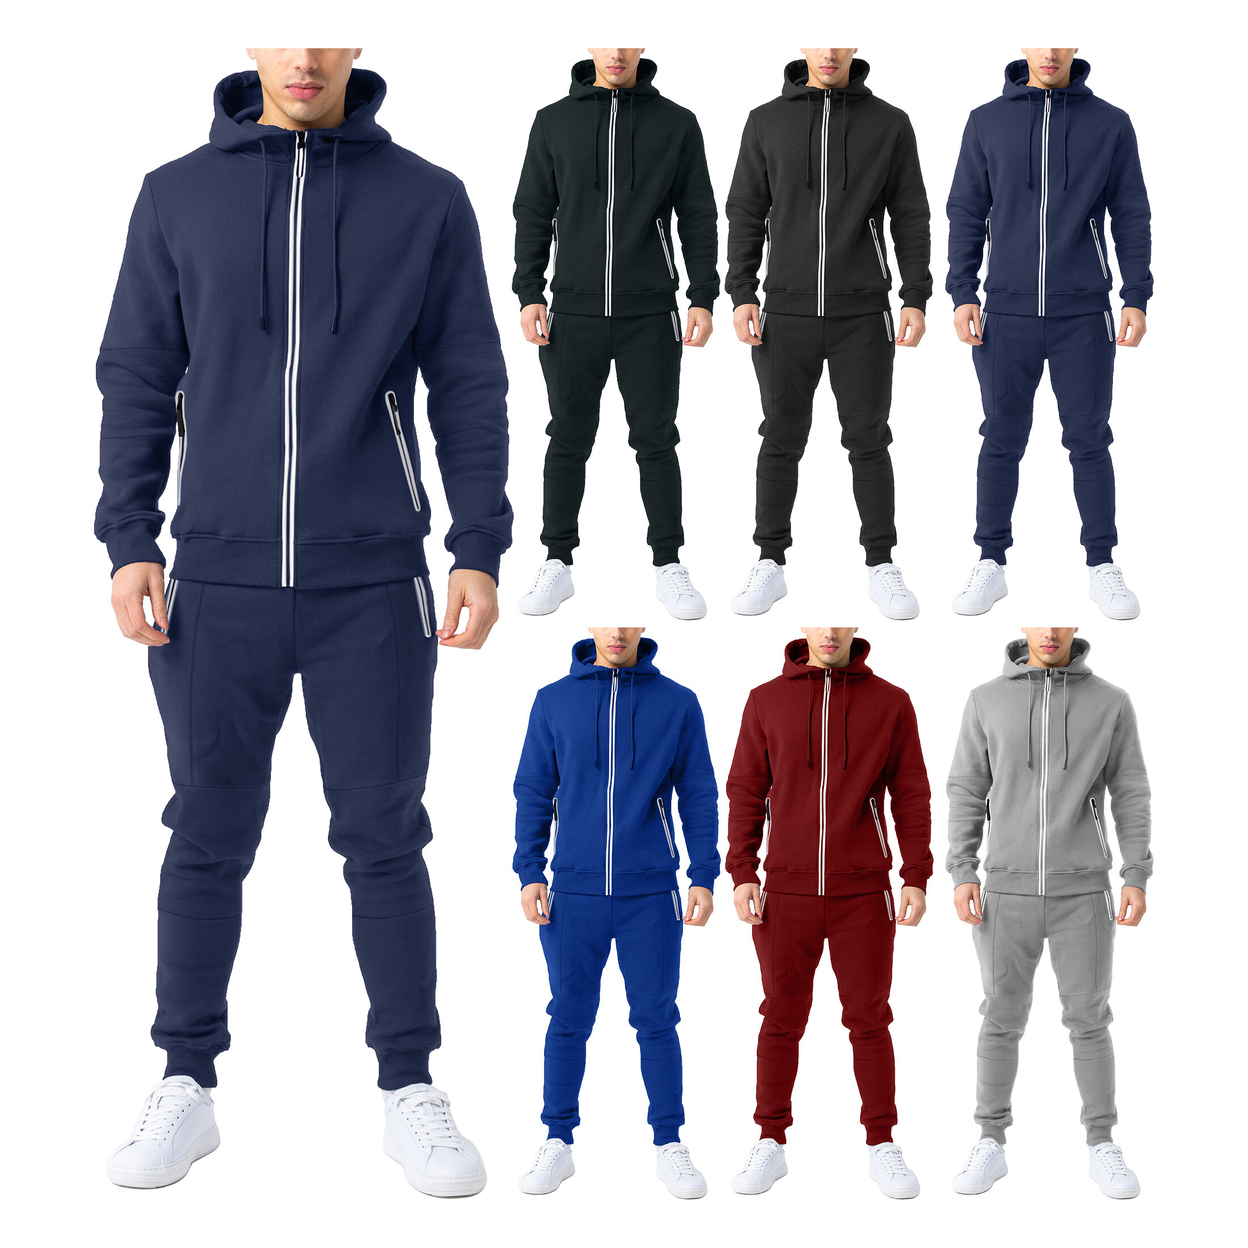 2-Pack: Men's Cozy Slim Fit Active Athletic Full Zip Hoodie And Jogger Tracksuit - Black & Blue, X-large